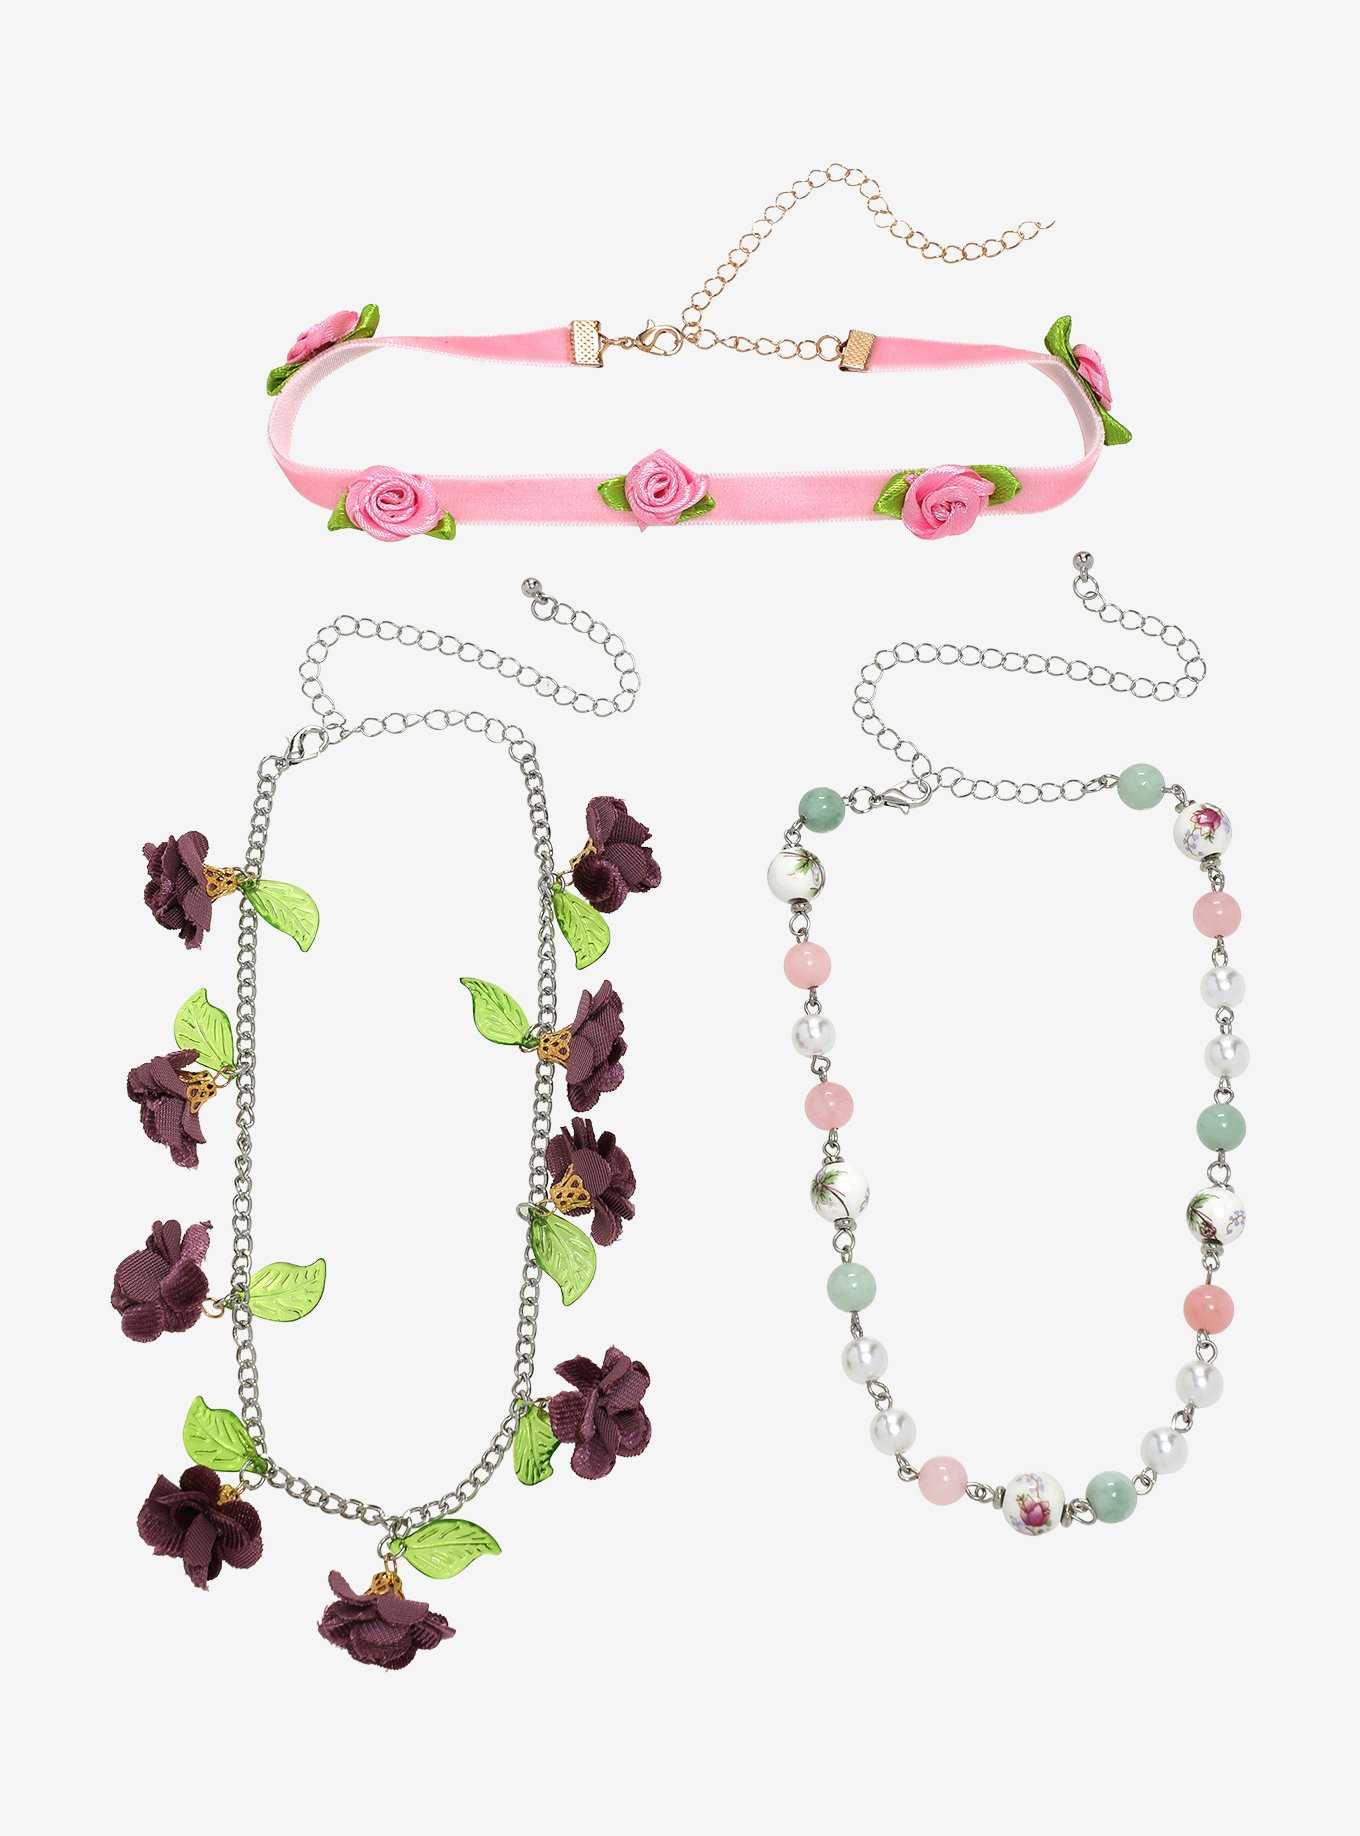 Thorn & Fable Floral Bead Choker Set, , hi-res